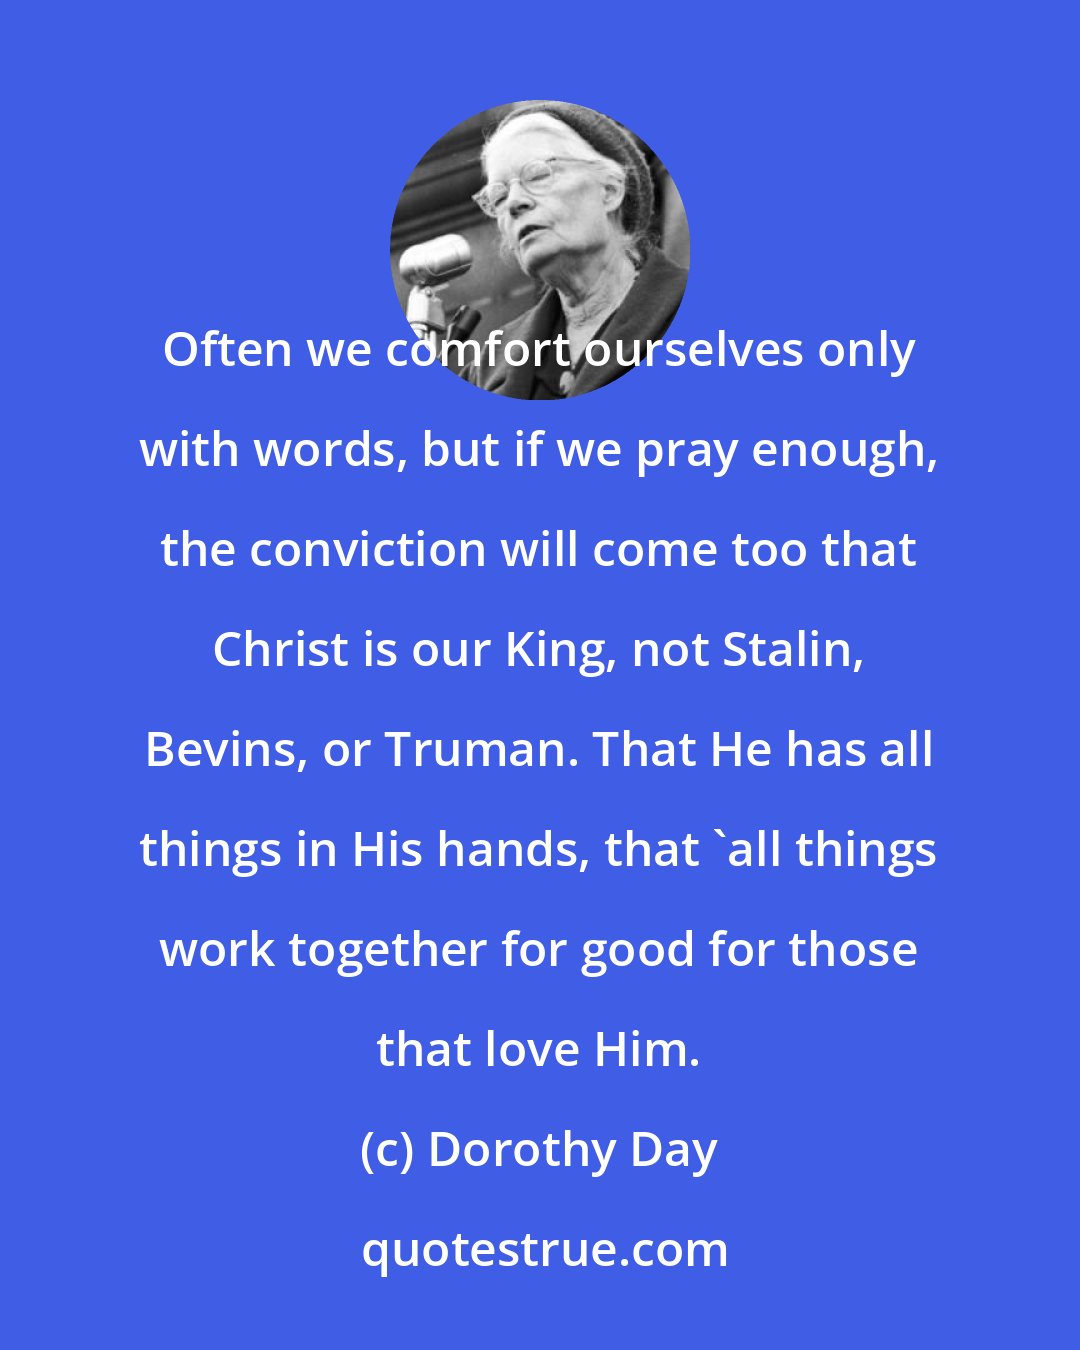 Dorothy Day: Often we comfort ourselves only with words, but if we pray enough, the conviction will come too that Christ is our King, not Stalin, Bevins, or Truman. That He has all things in His hands, that 'all things work together for good for those that love Him.